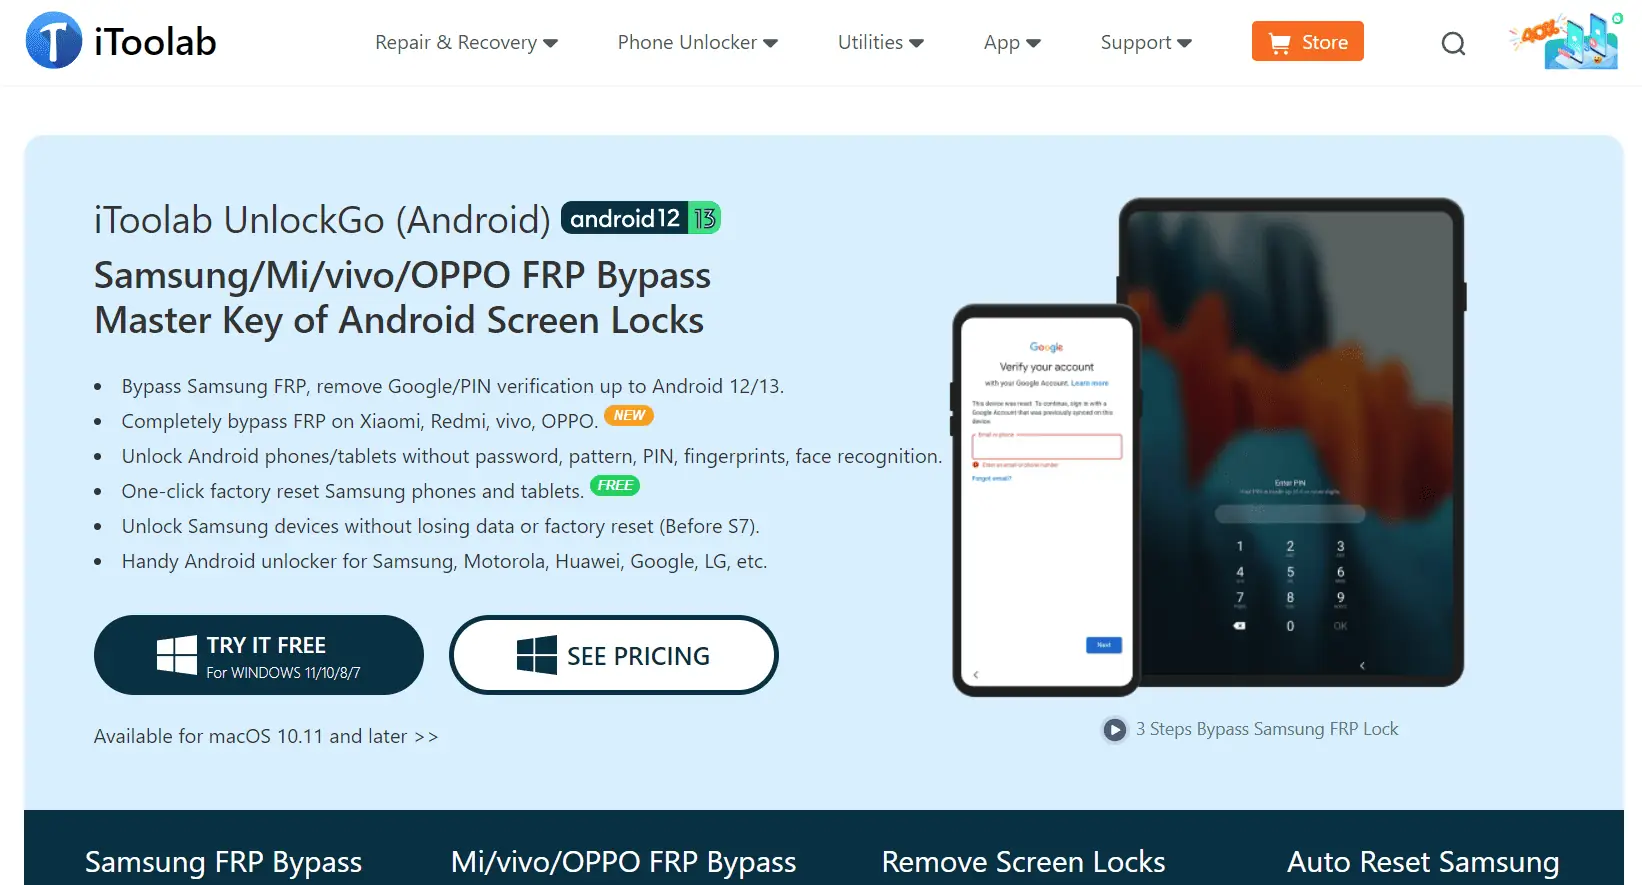 Unlock Android Phone 2 – Learn how to Unlock Android Telephone With out Password & Bypas FRP with iToolab UnlockGo – World Tech Power